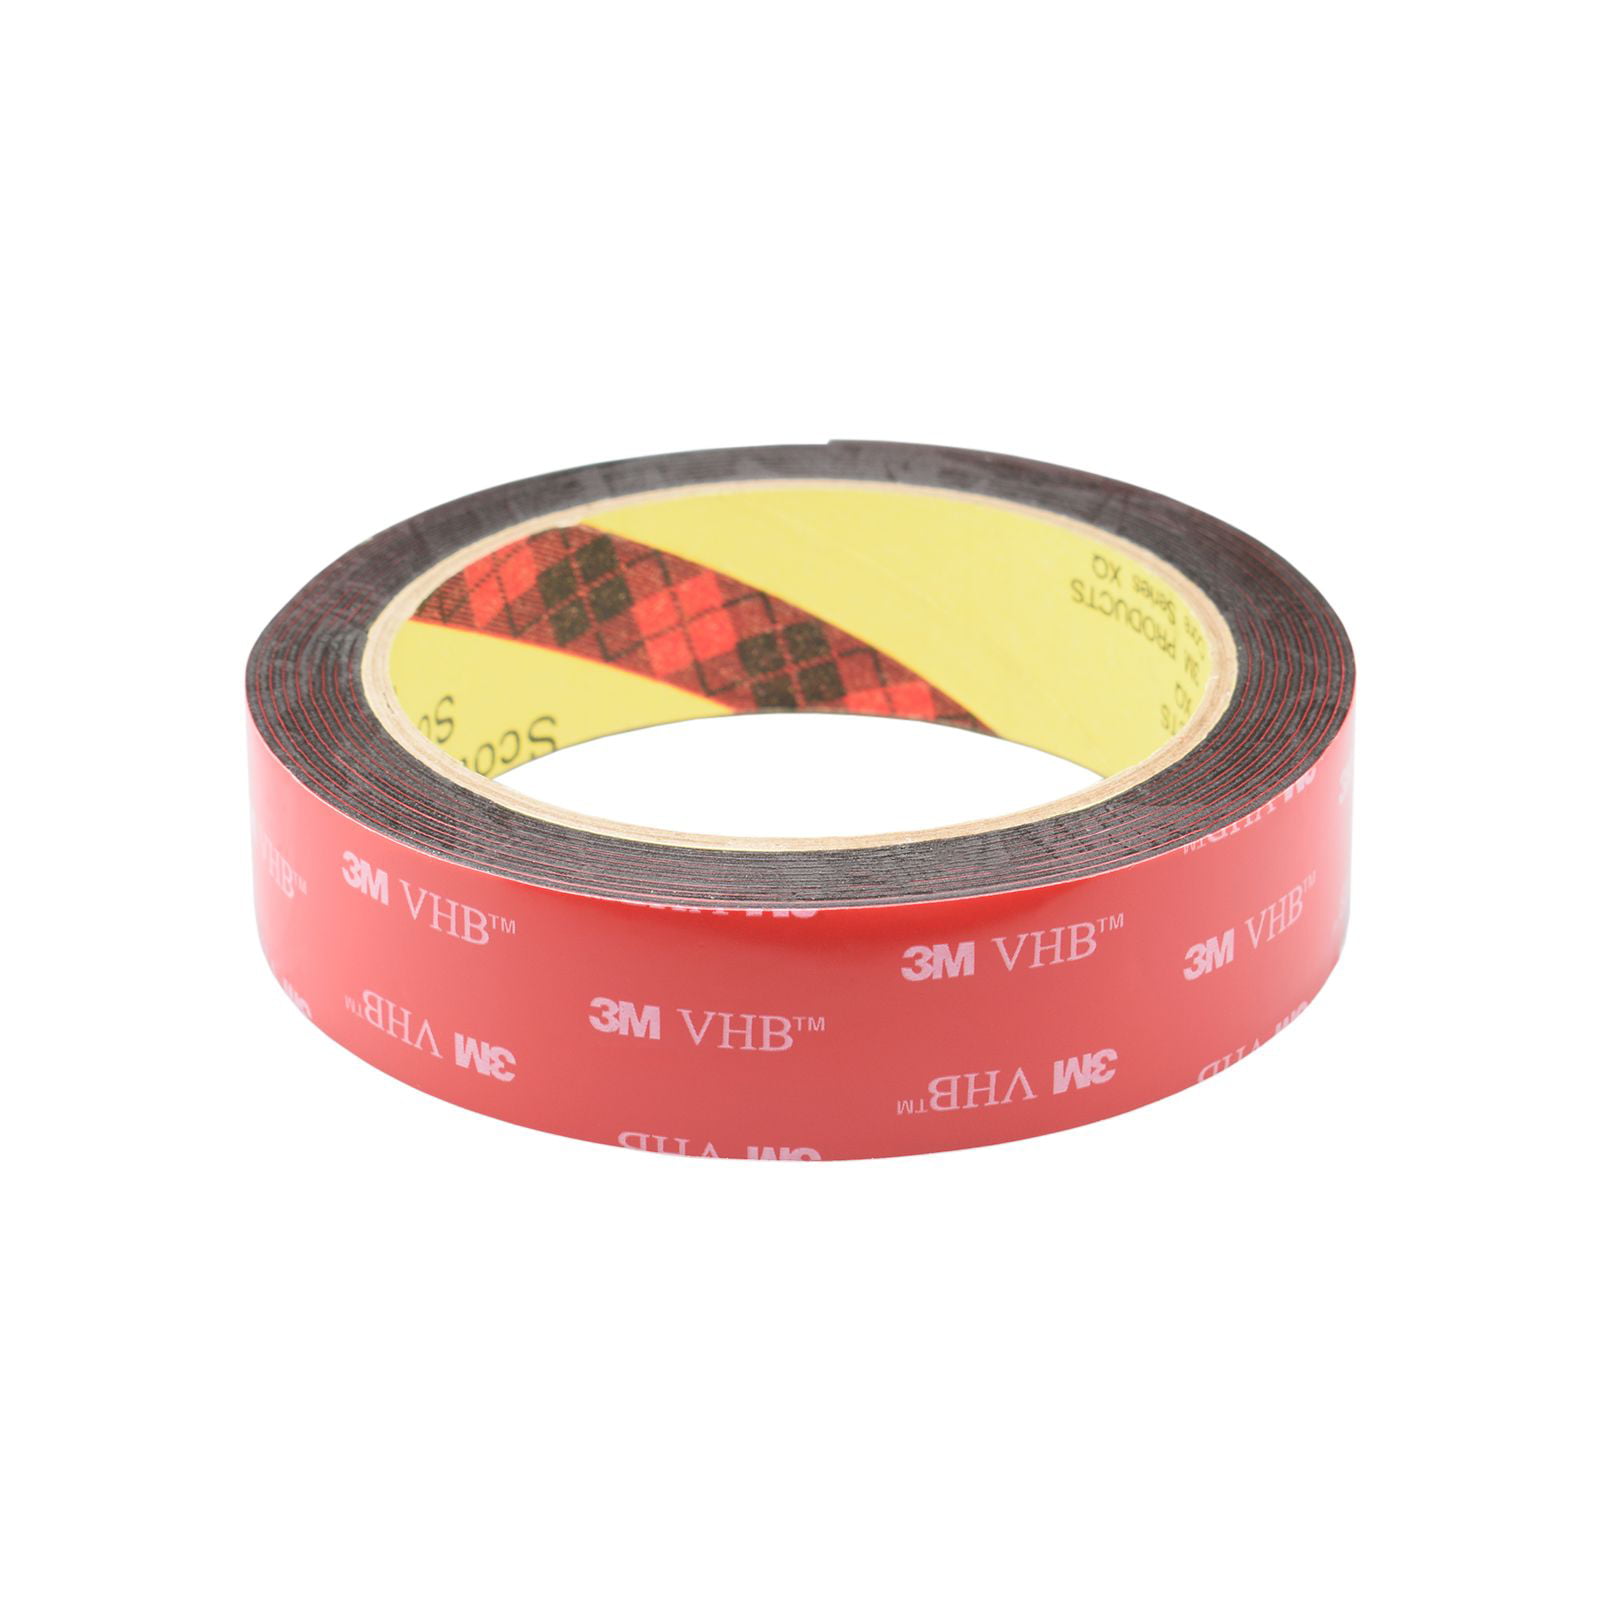 3M adhesive double sided tape 10mm x 50m - Cablematic